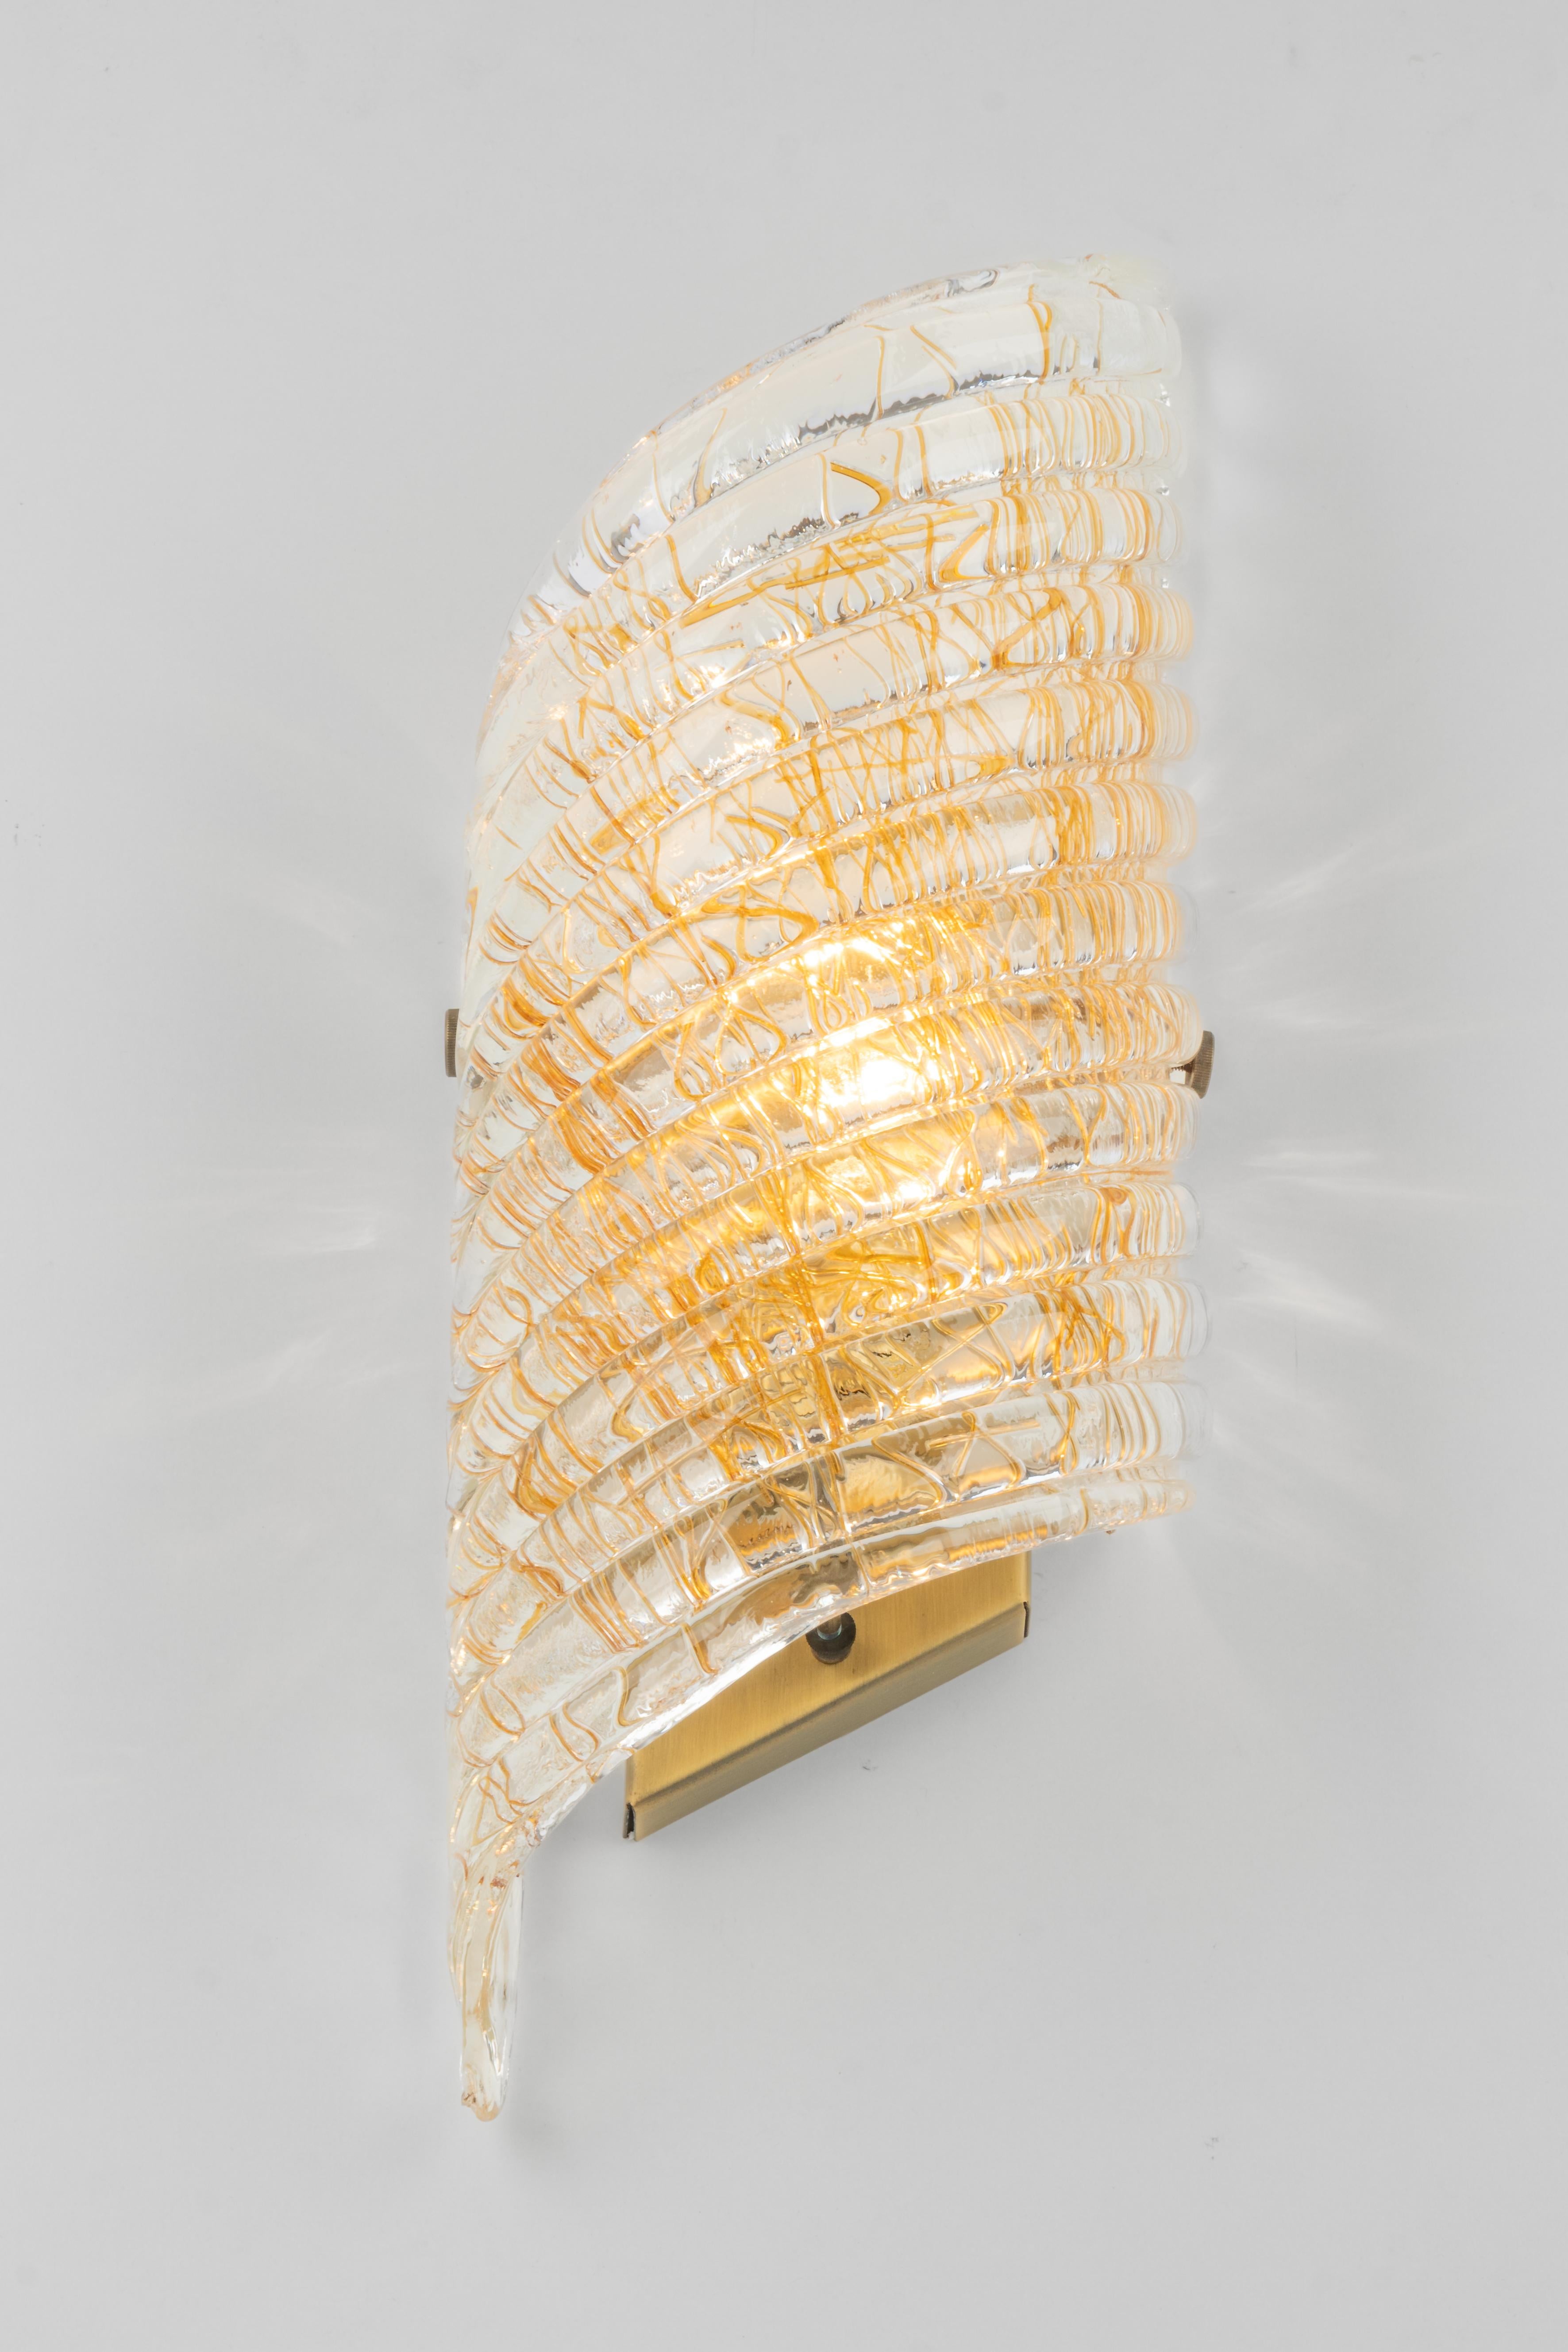 Single Large Murano Brass Sconce by Hillebrand, Germany, 1970s For Sale 2